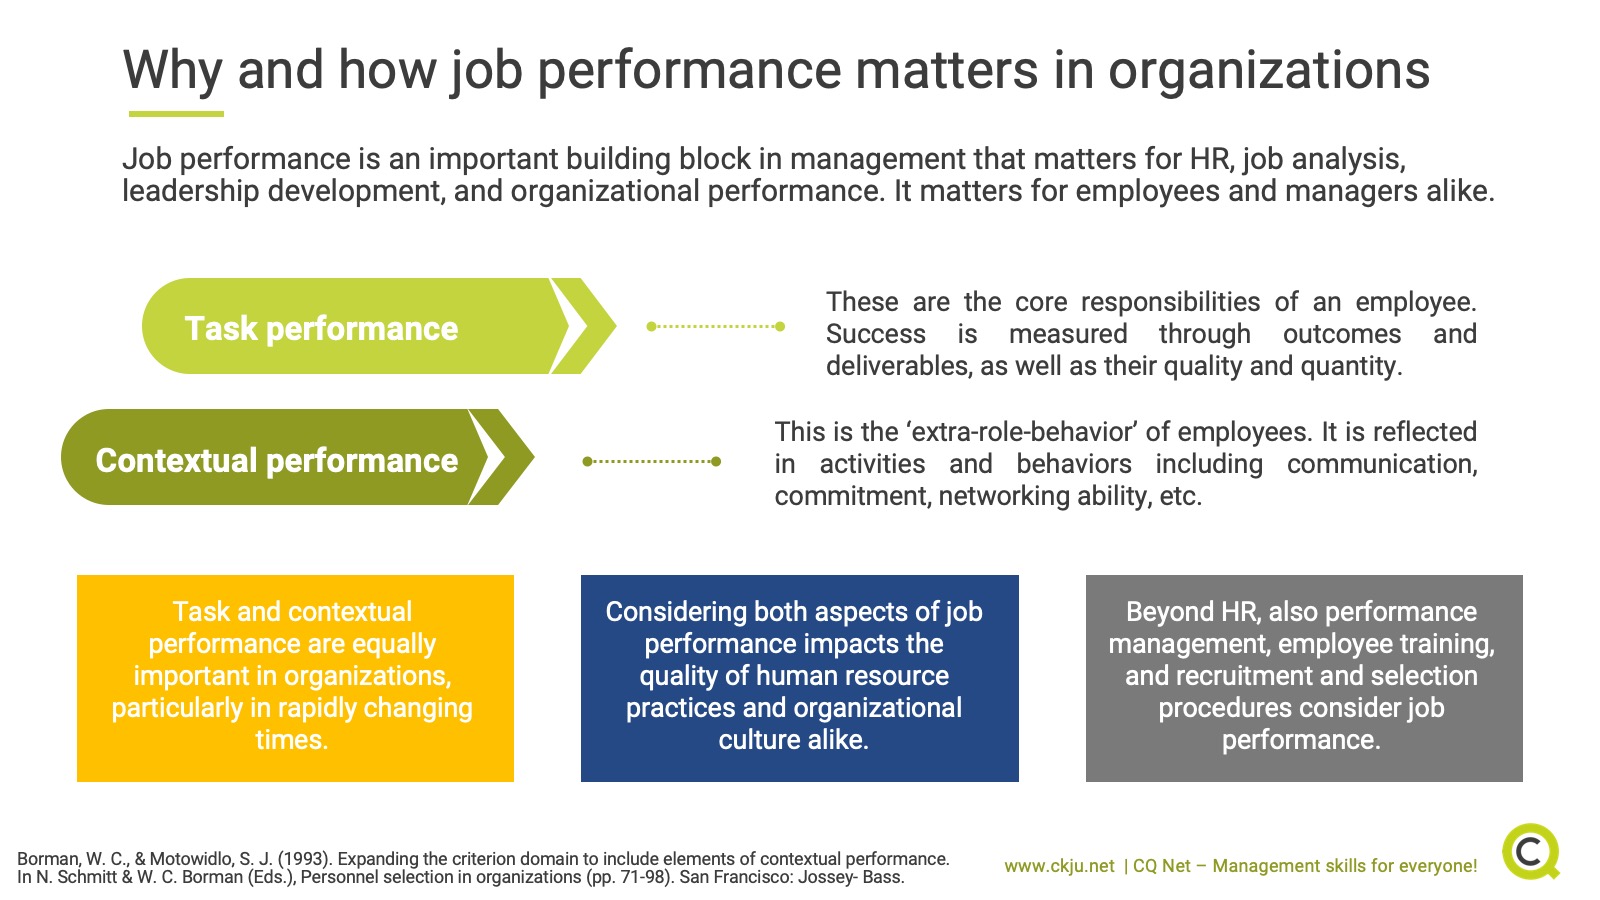 Why and how job performance matters in organizations